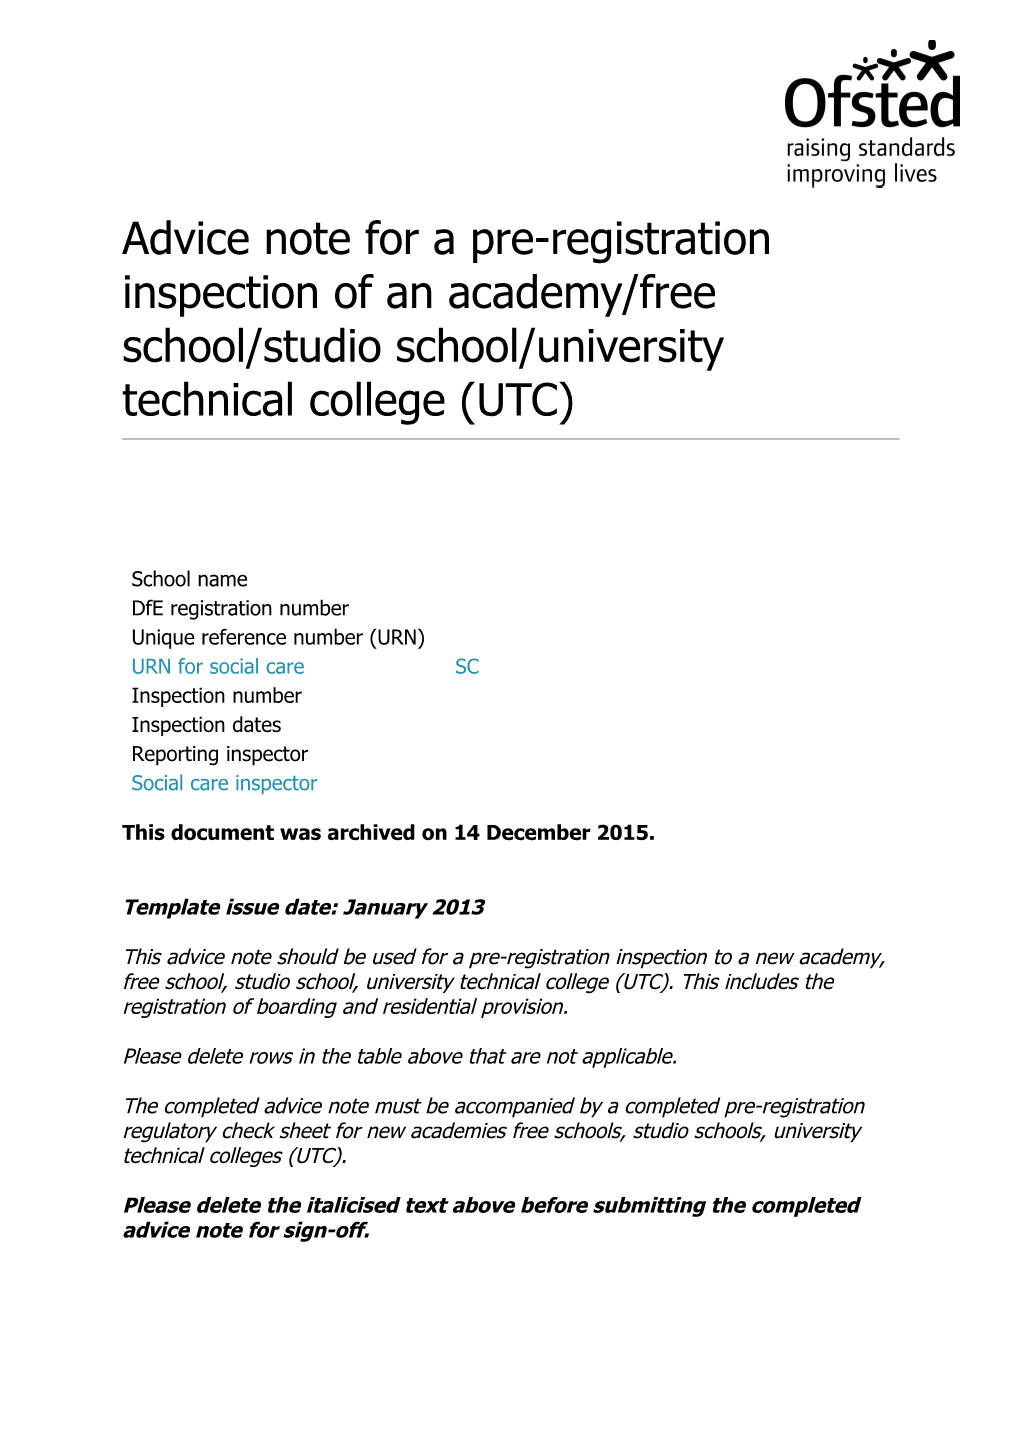 4. Advice Note for Pre-Registration Inspection to an Academy, Free School, Studio School